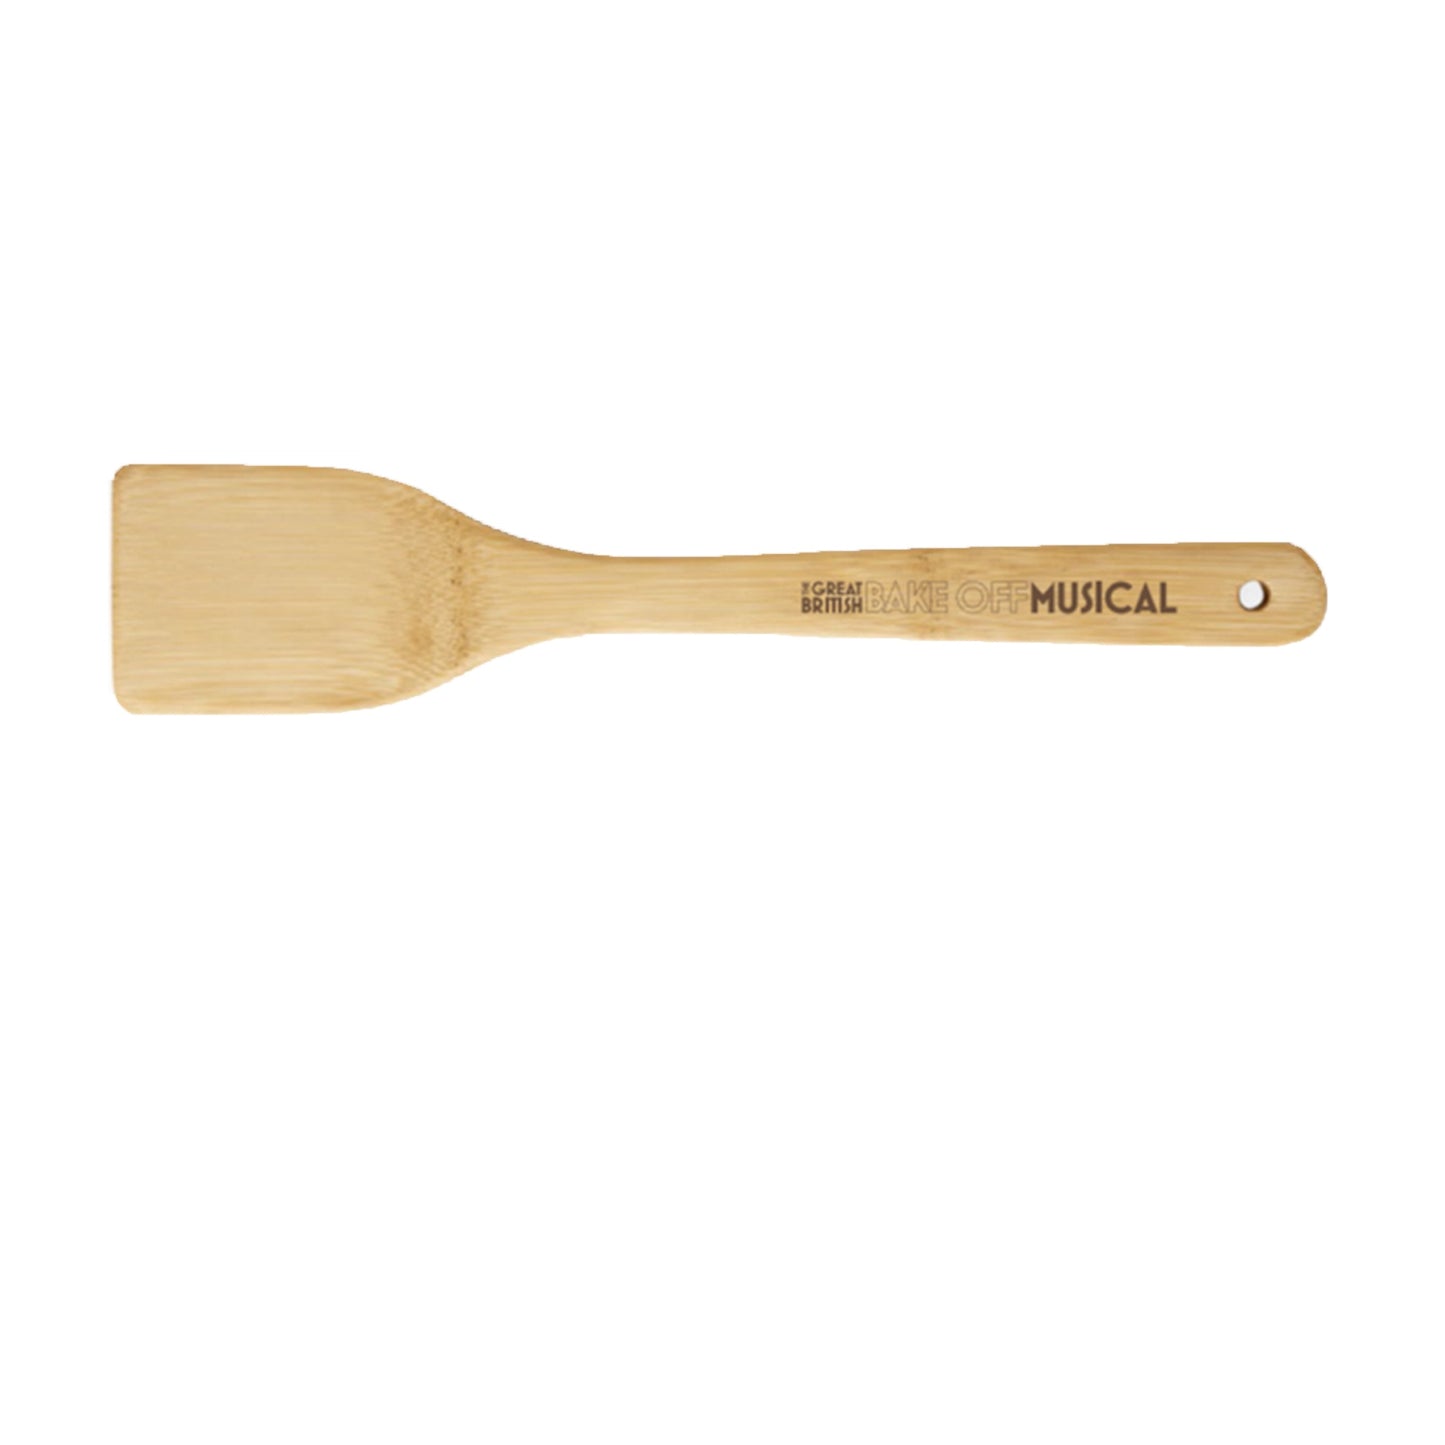 THE GREAT BRITISH BAKE OFF - Wooden Spatula